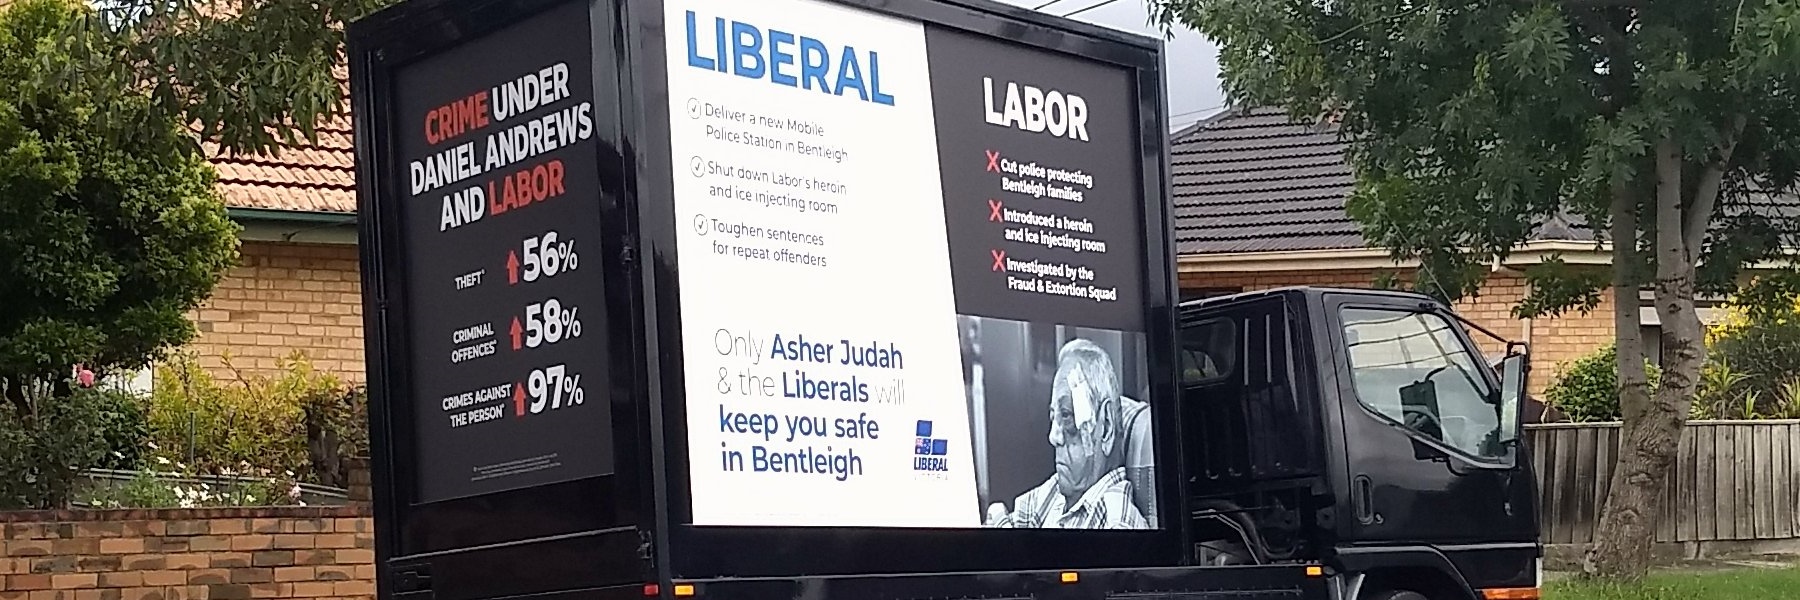 Liberal campaign truck for state election 2014